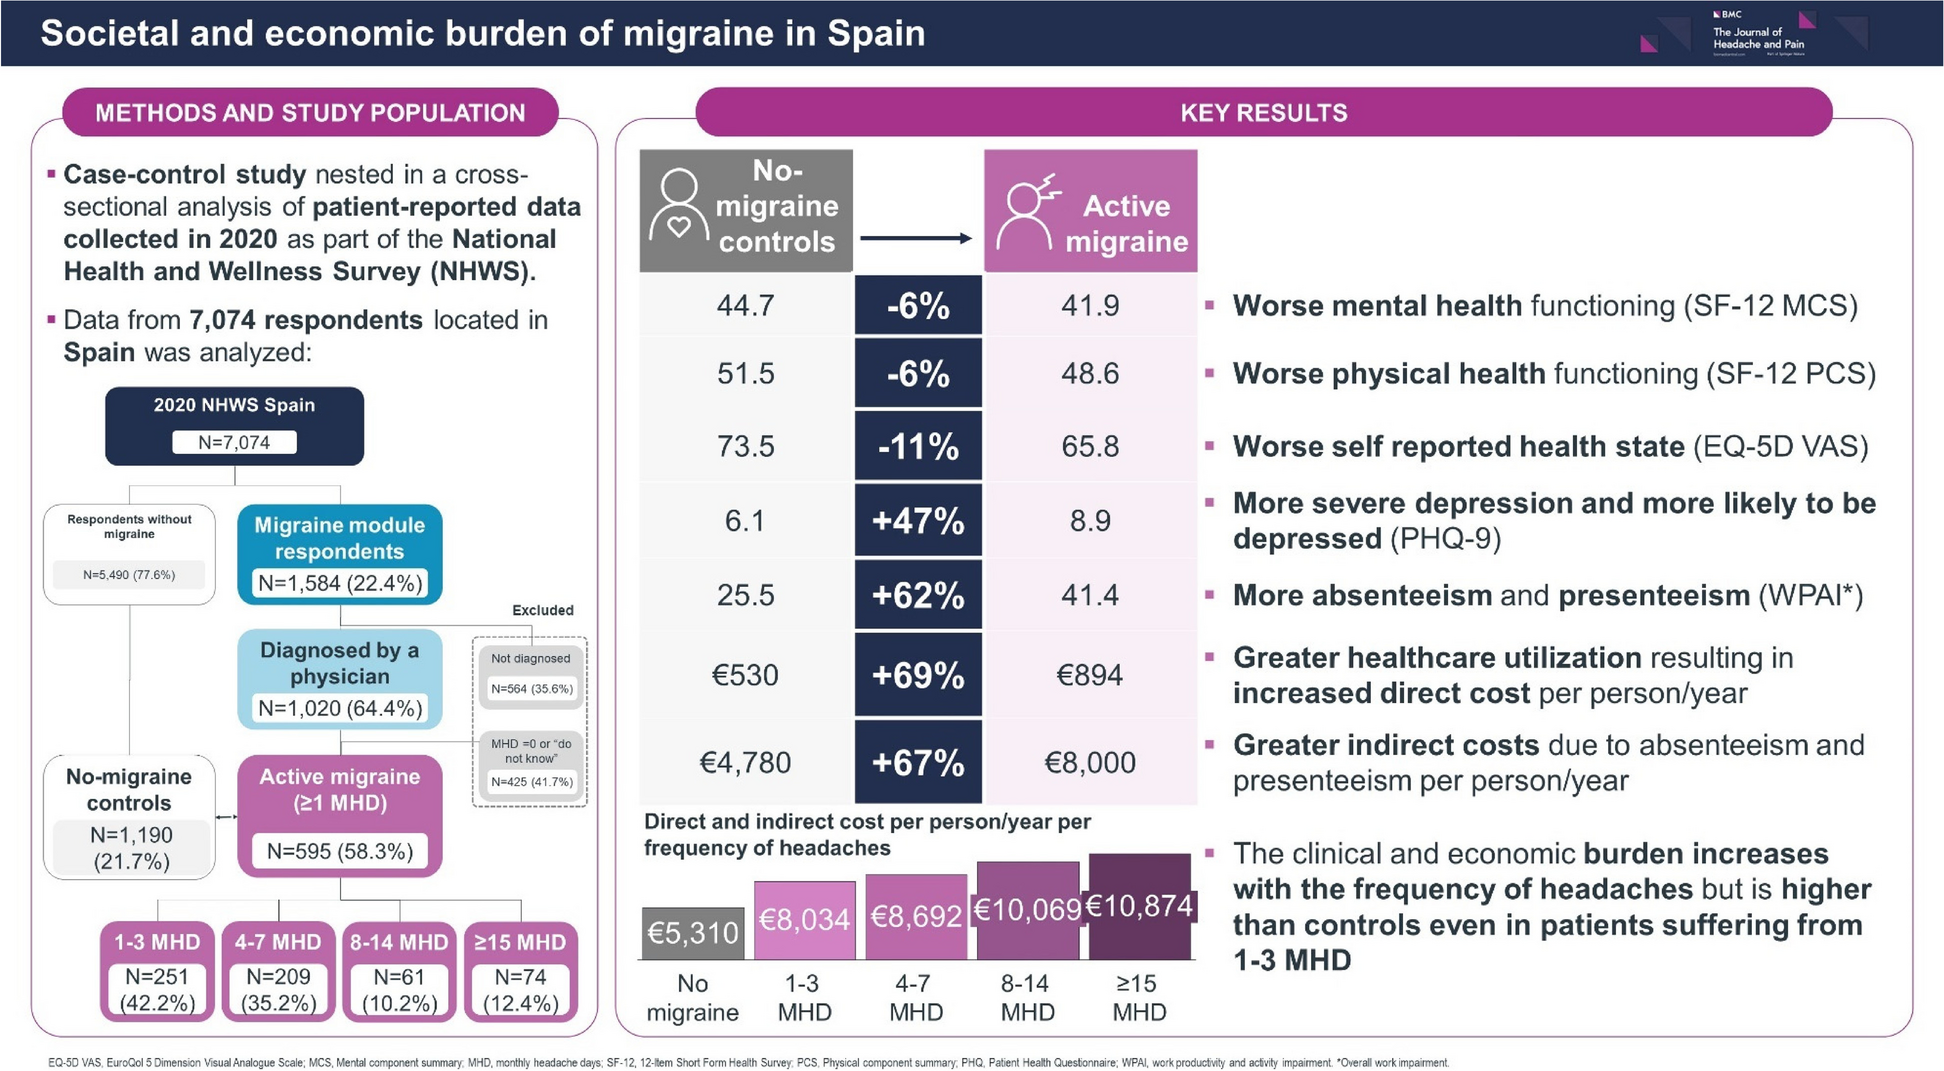 Societal and economic burden of migraine in Spain: results from the 2020 National Health and Wellness Survey